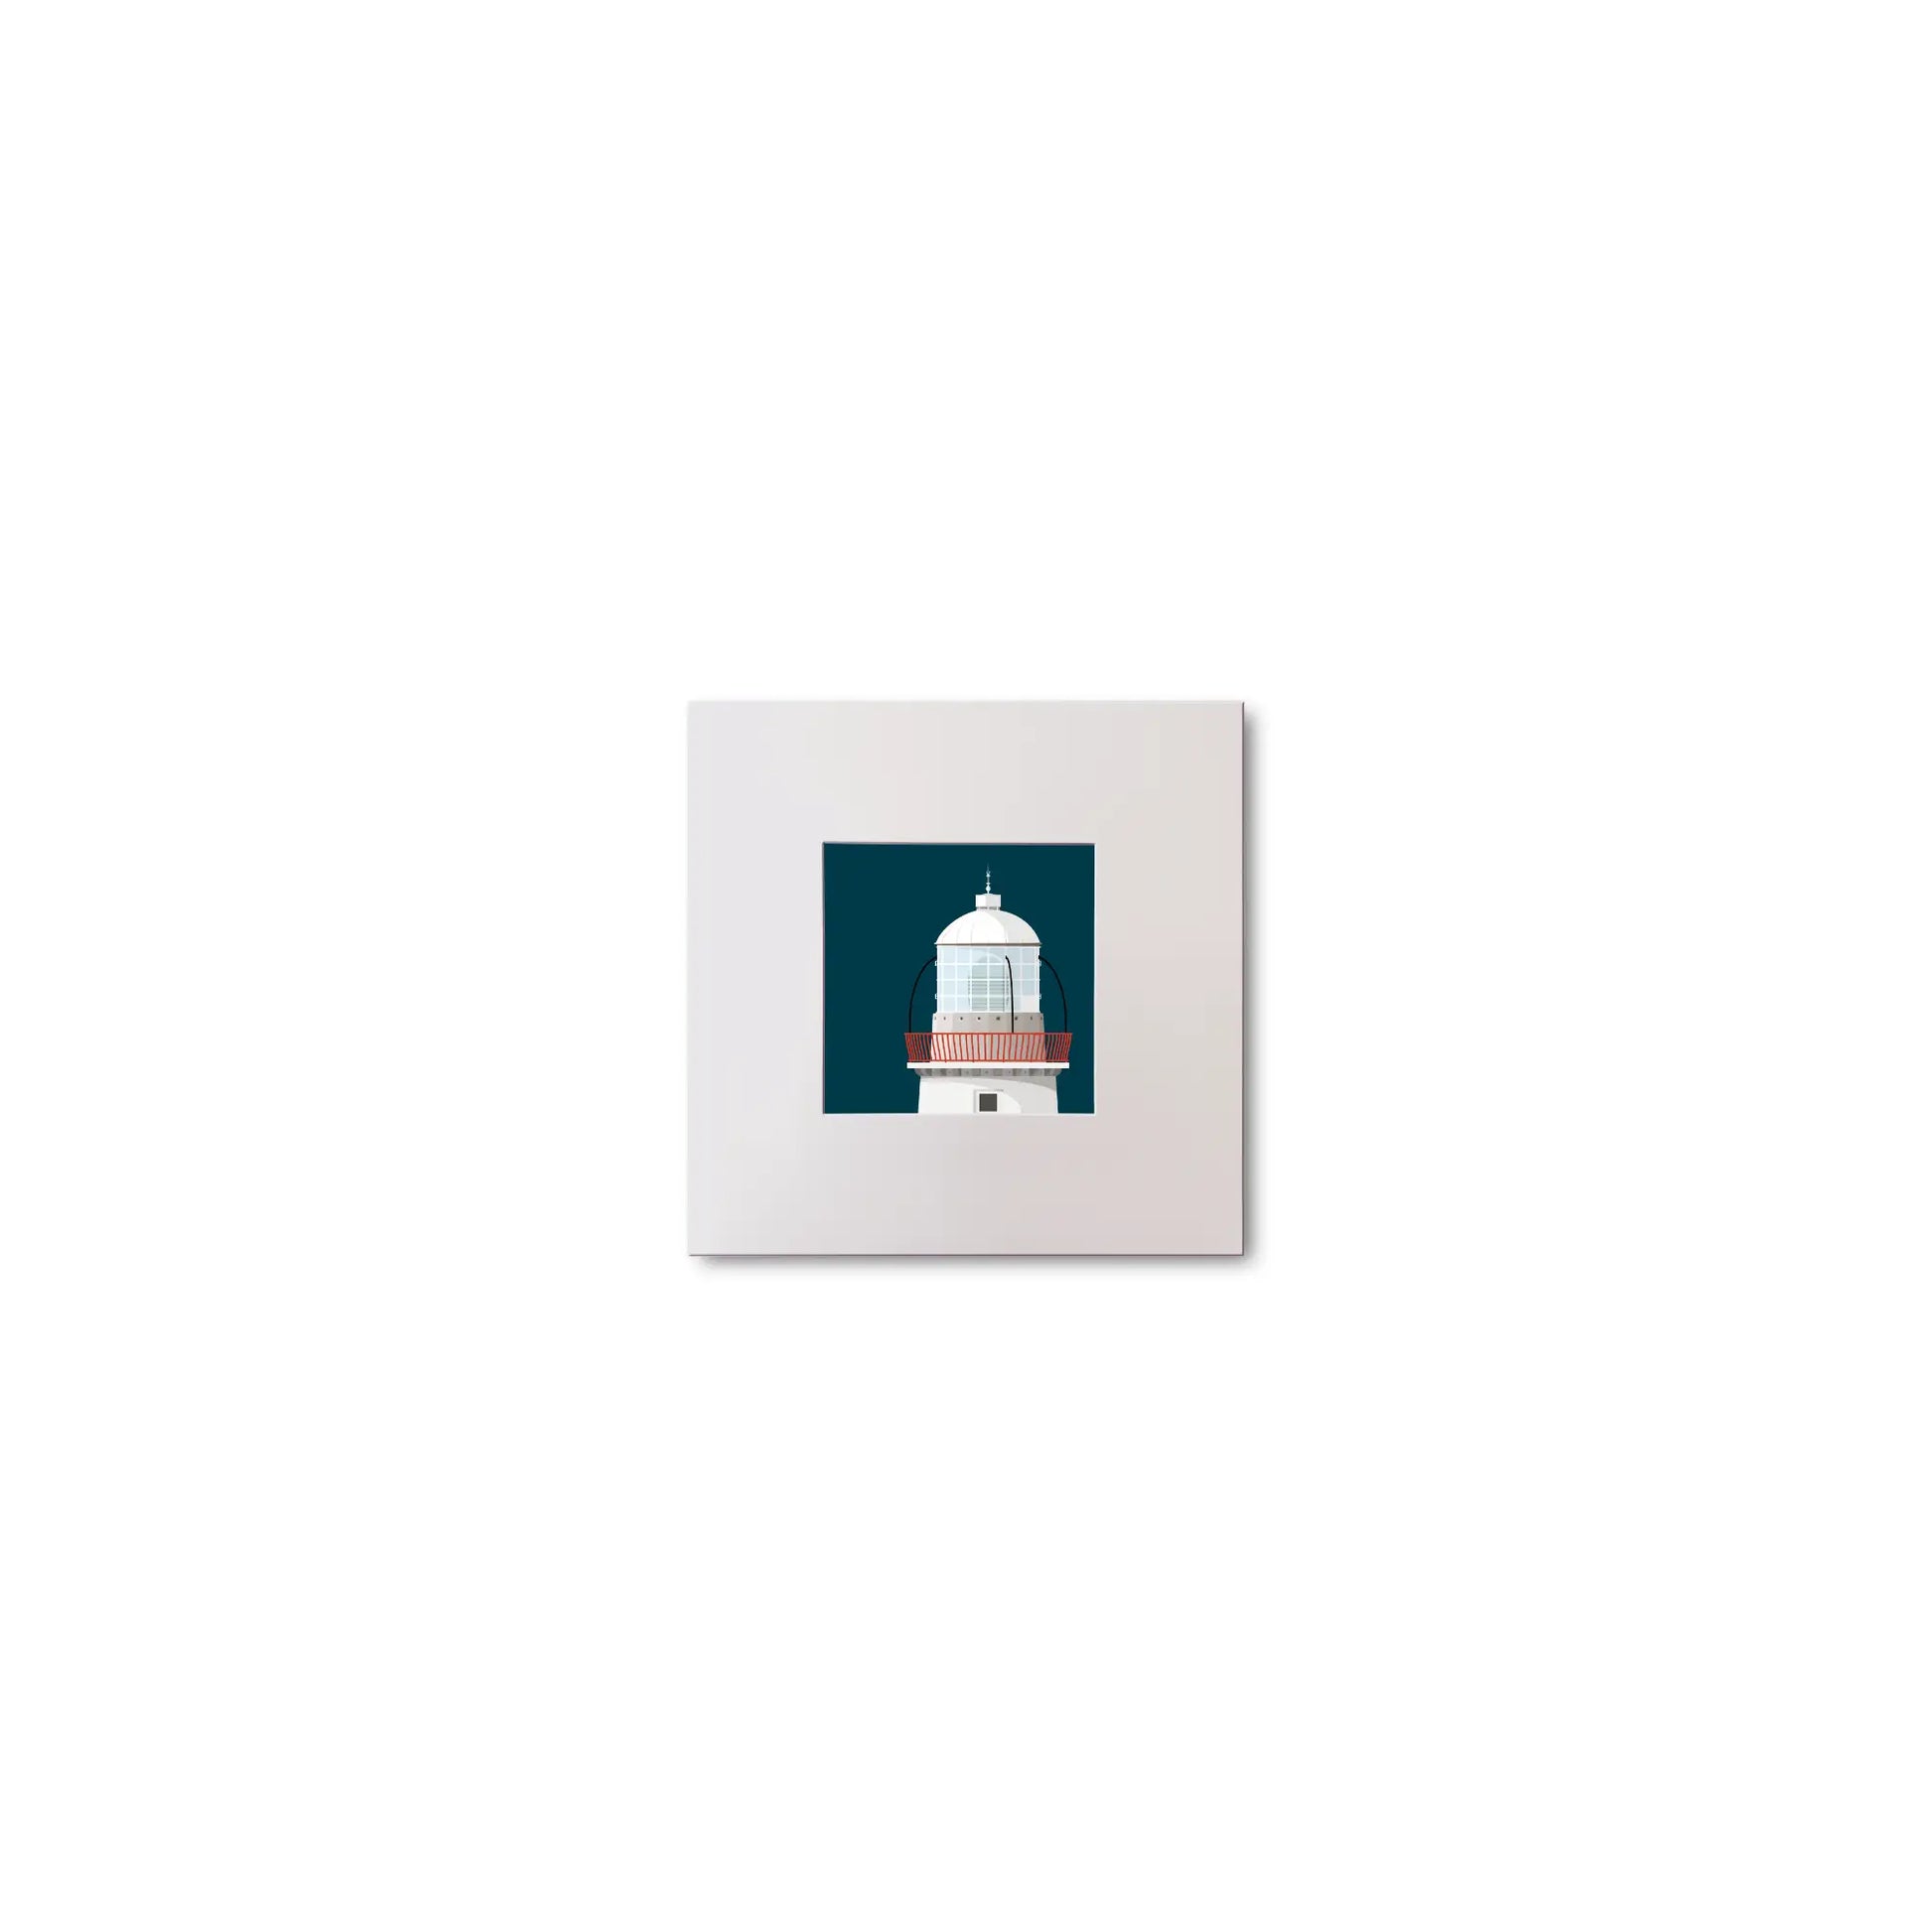 Illustration Eagle Island lighthouse on a midnight blue background, mounted and measuring 10x10cm.